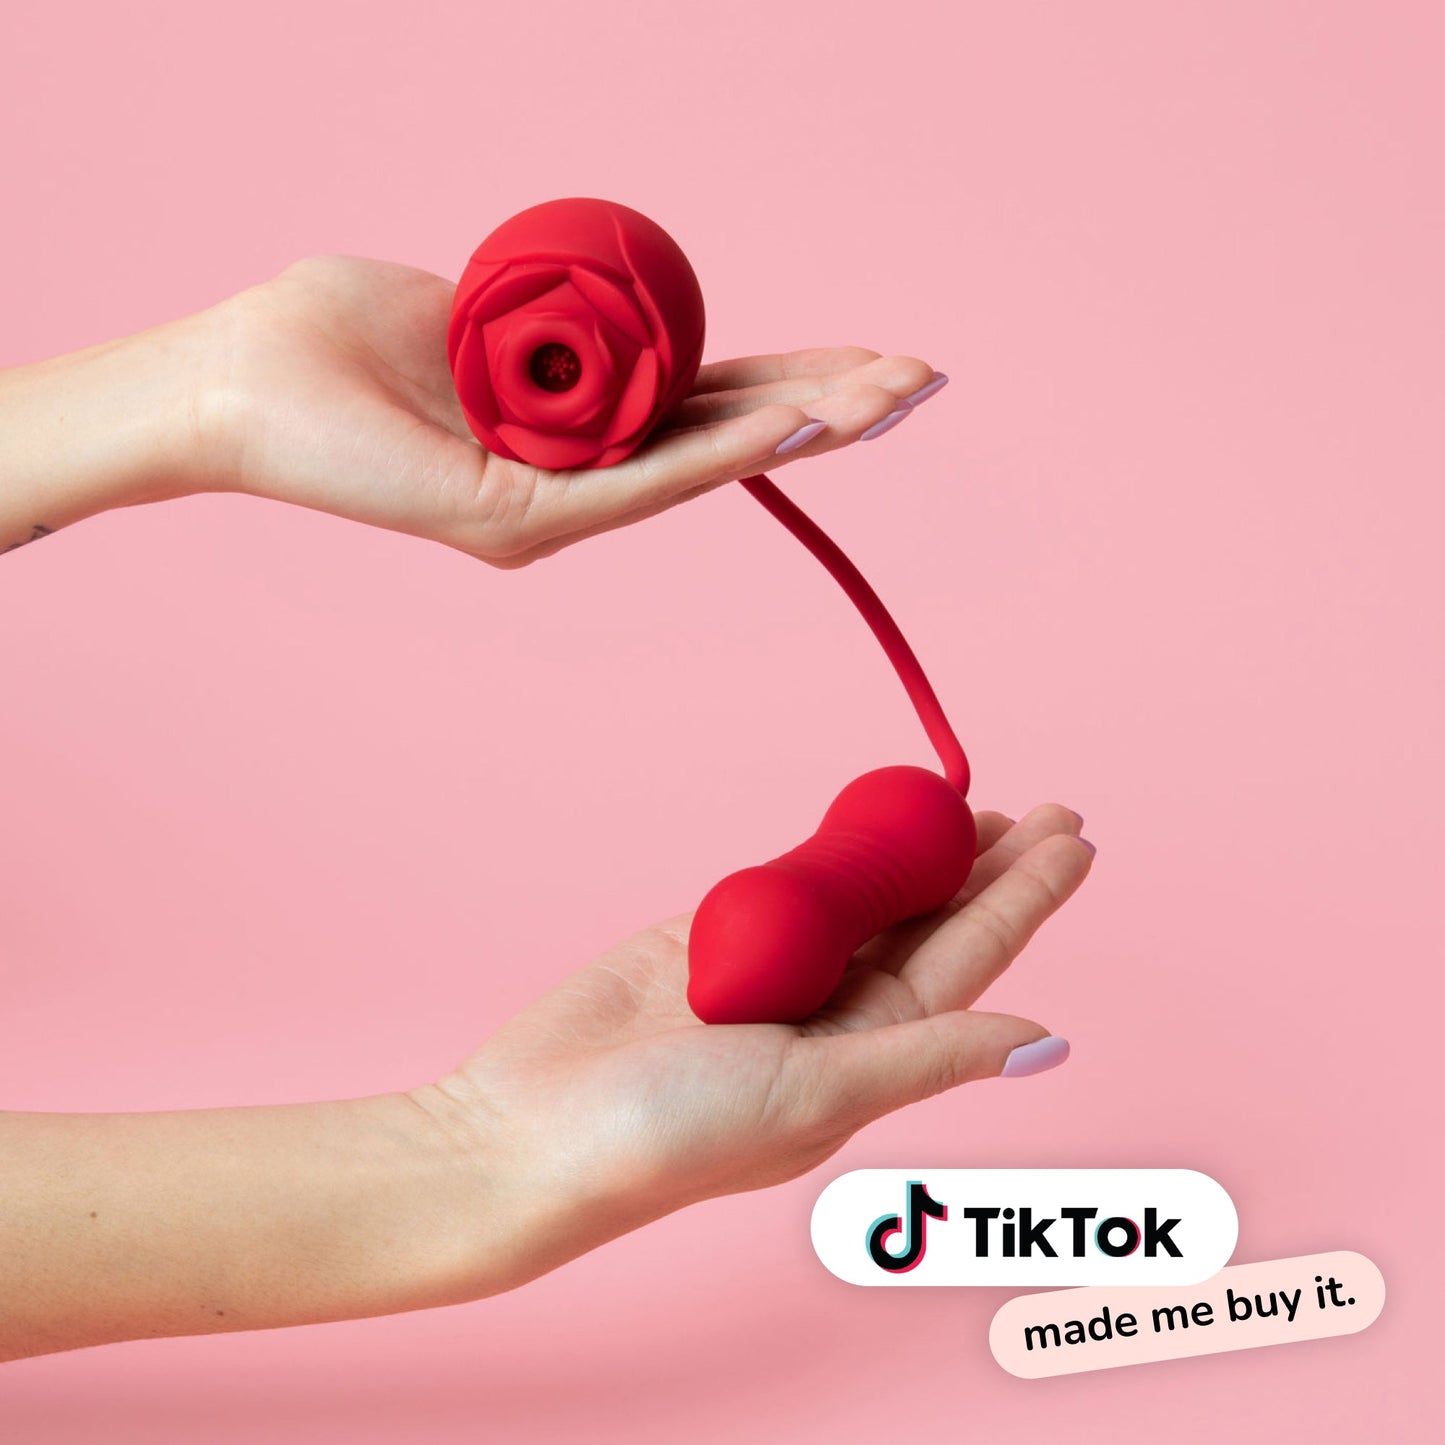 Blossom pro suction rose toy with vibrator bullet tail attachment red rose vibrator for women with tiktok badge